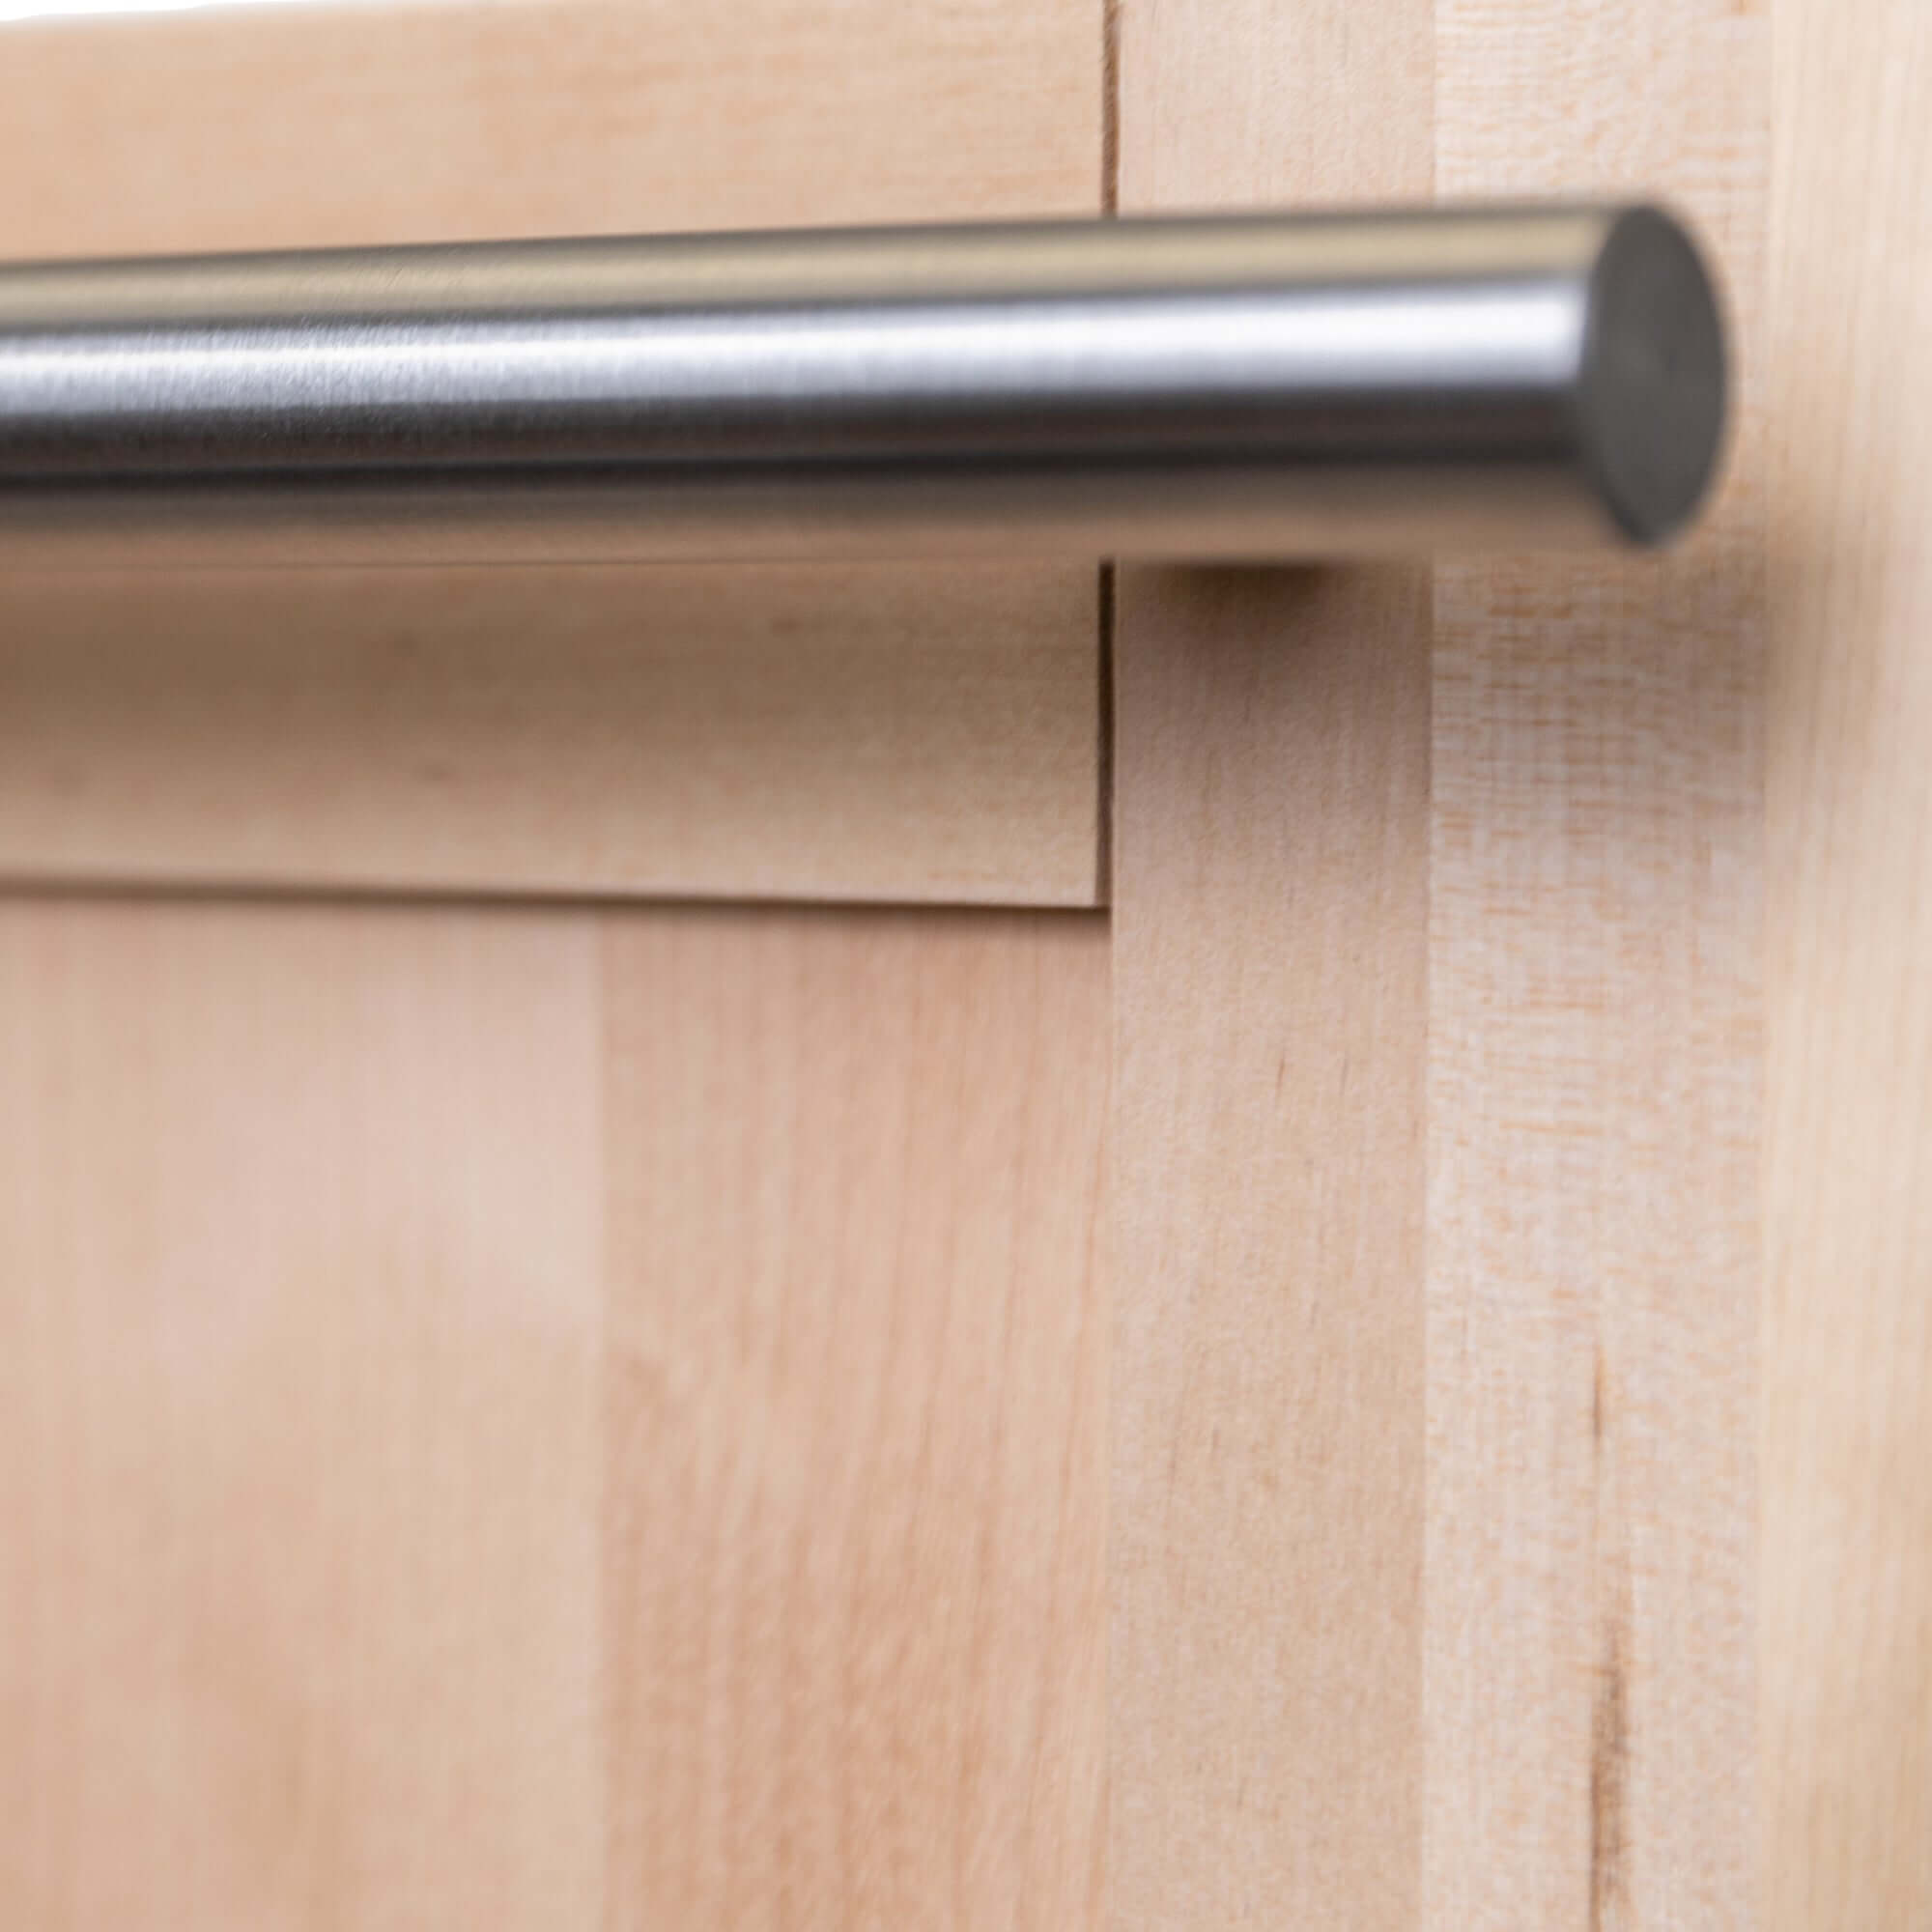 Modern handle and unfinished wood panel close up right.